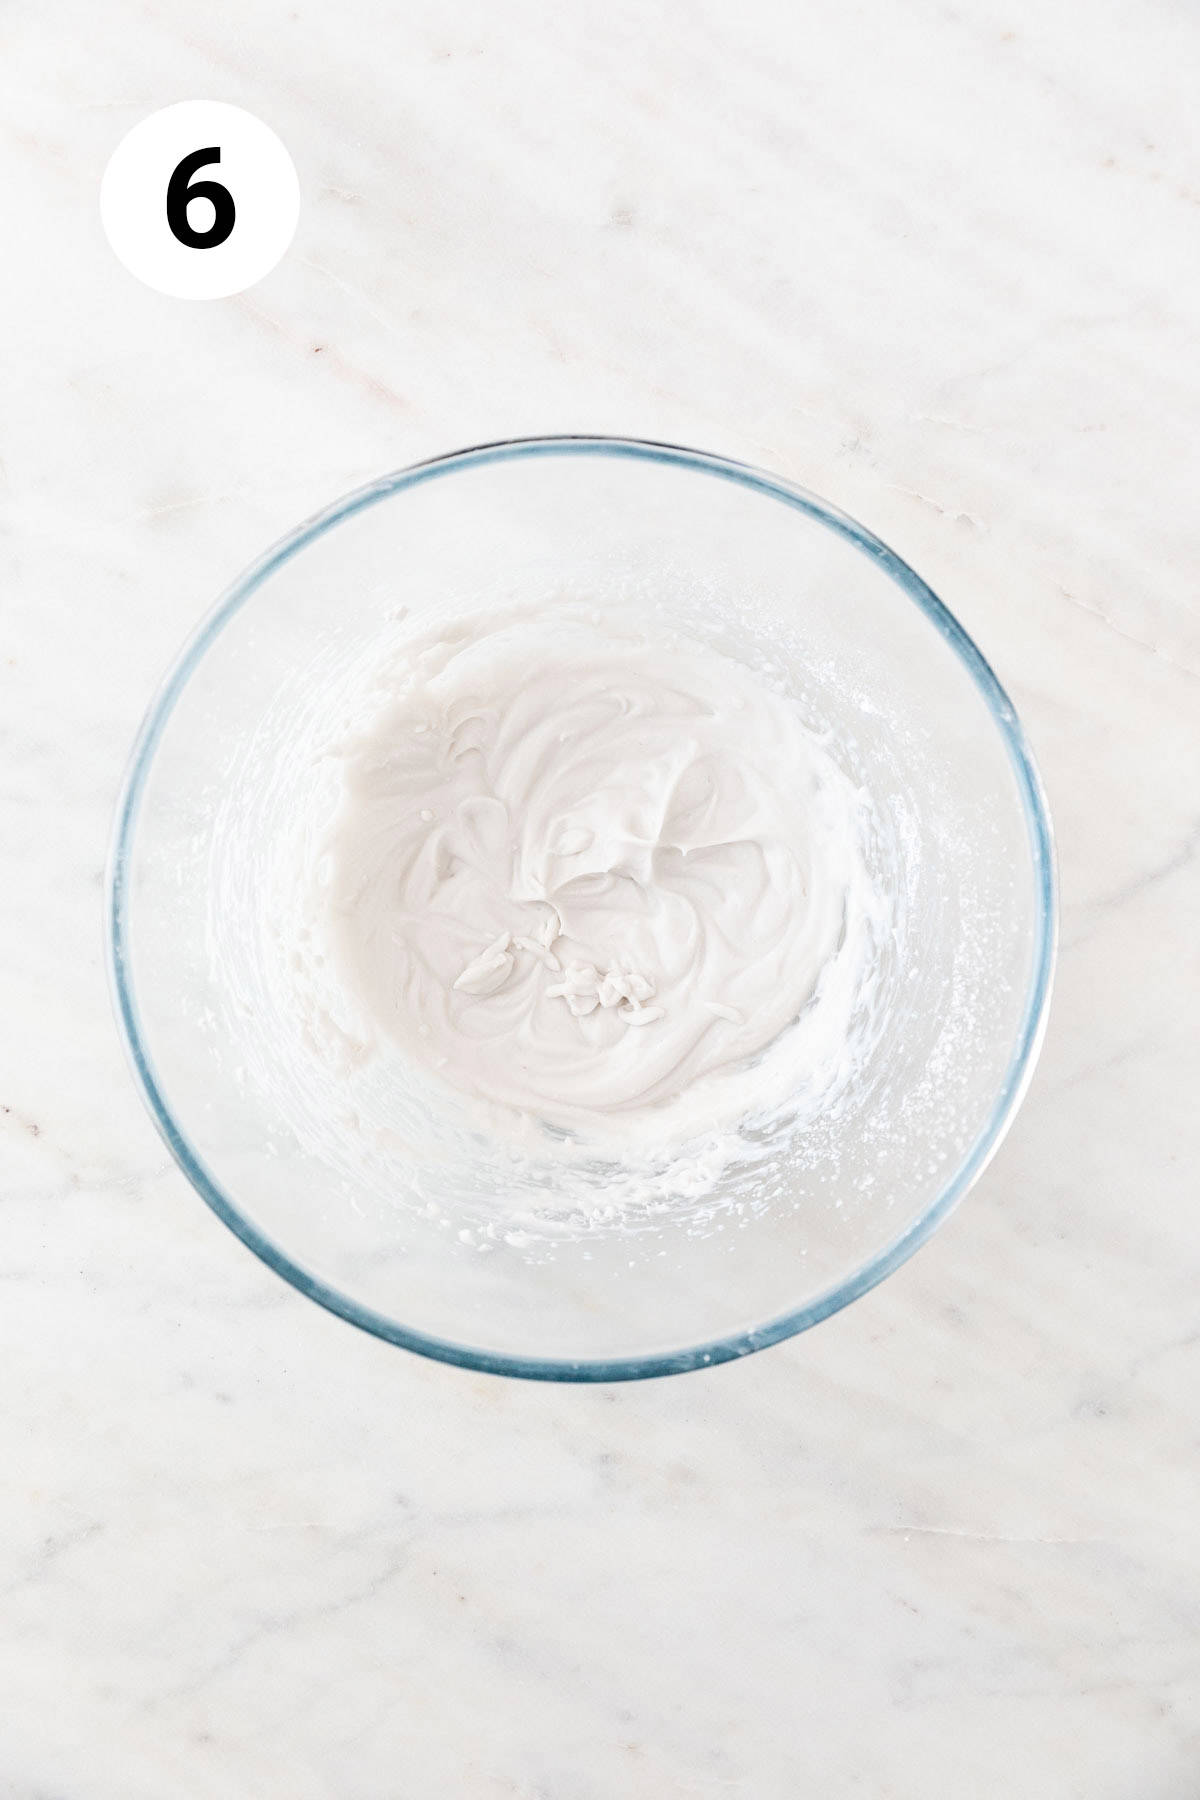 Vegan whipped cream in a large mixing bowl.